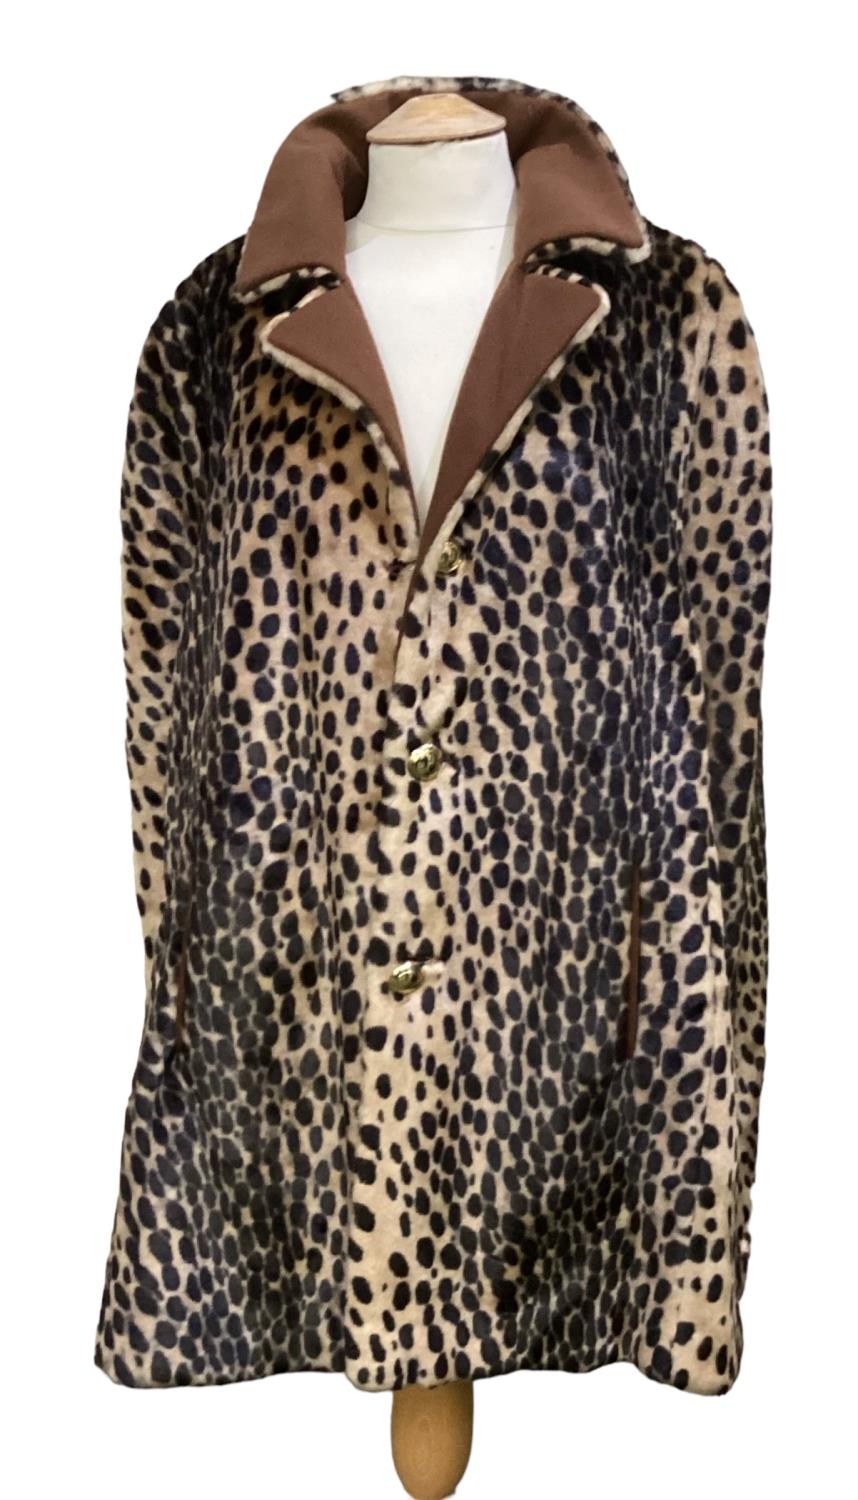 BIBA reversible camel wool and faux leopard print cape, good condition (buttons slightly loose)